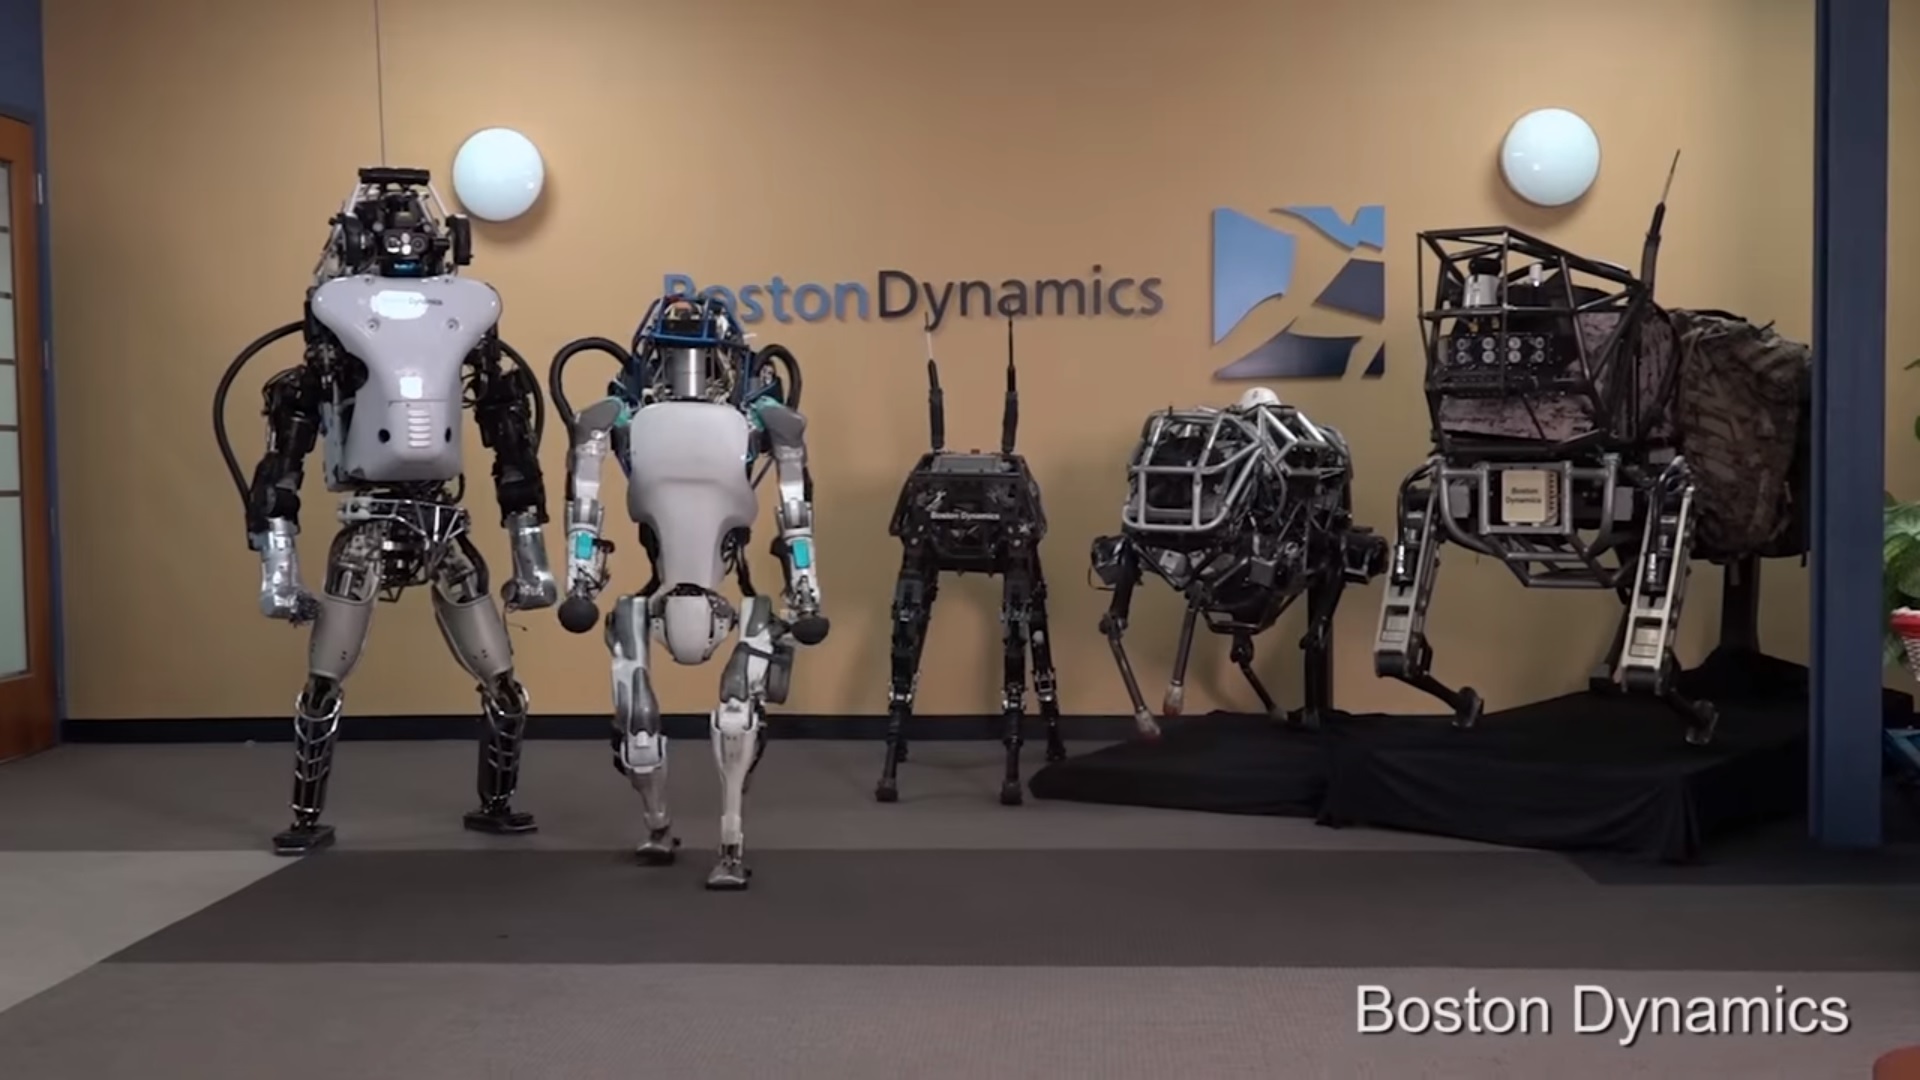 Atlas is the new Boston Dynamics robot that can walk and carry objects like a person